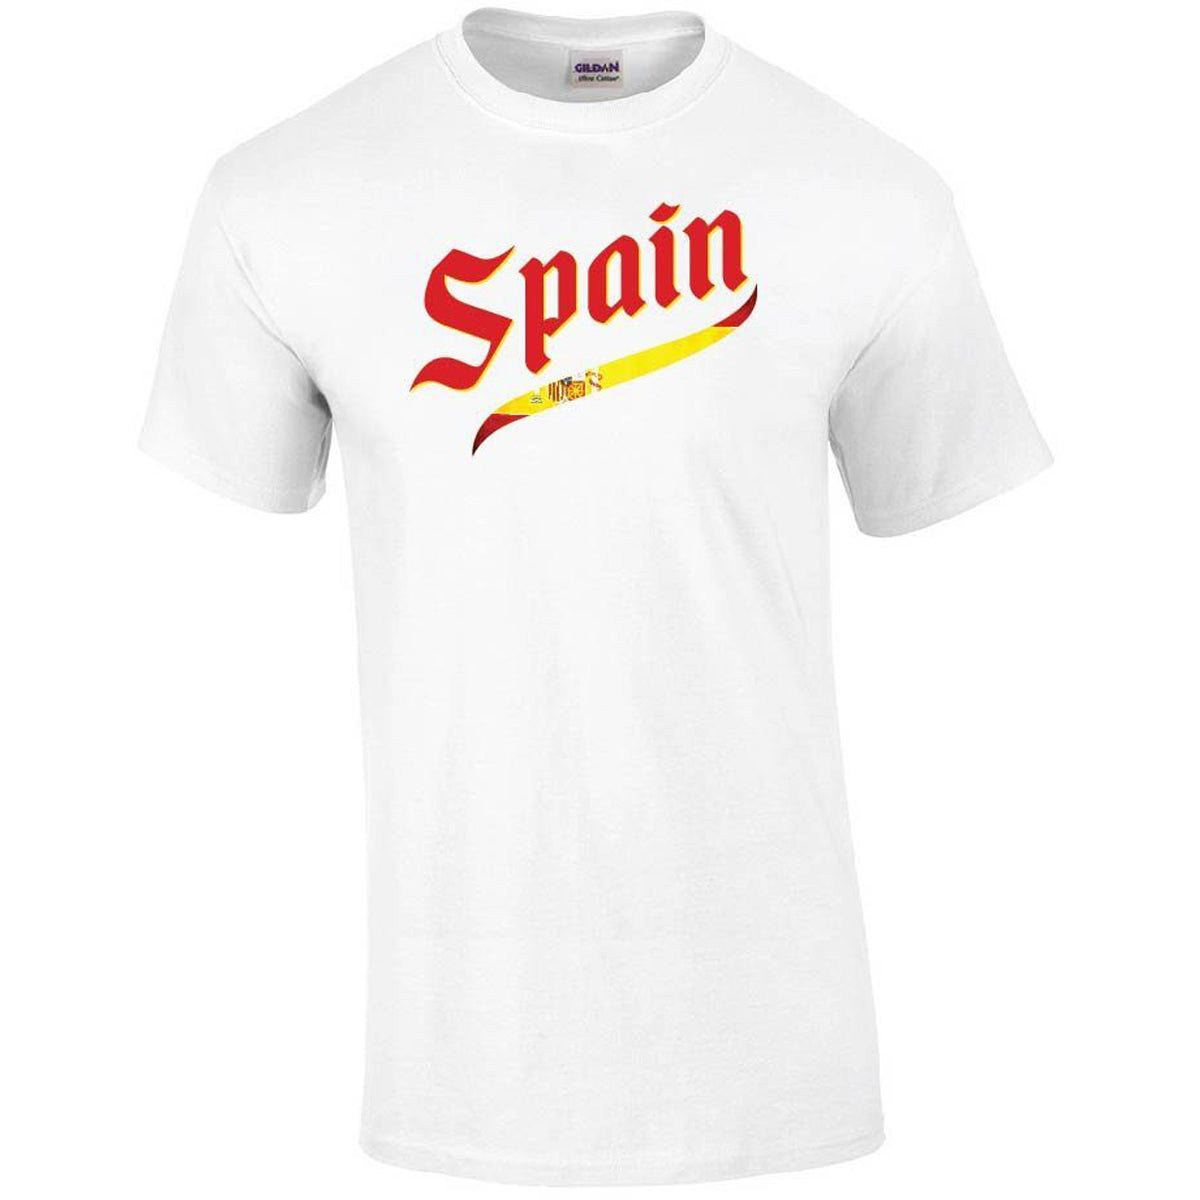 Spain Script World Cup 2022 Printed Tee T-shirts 411 Youth Medium White Youth